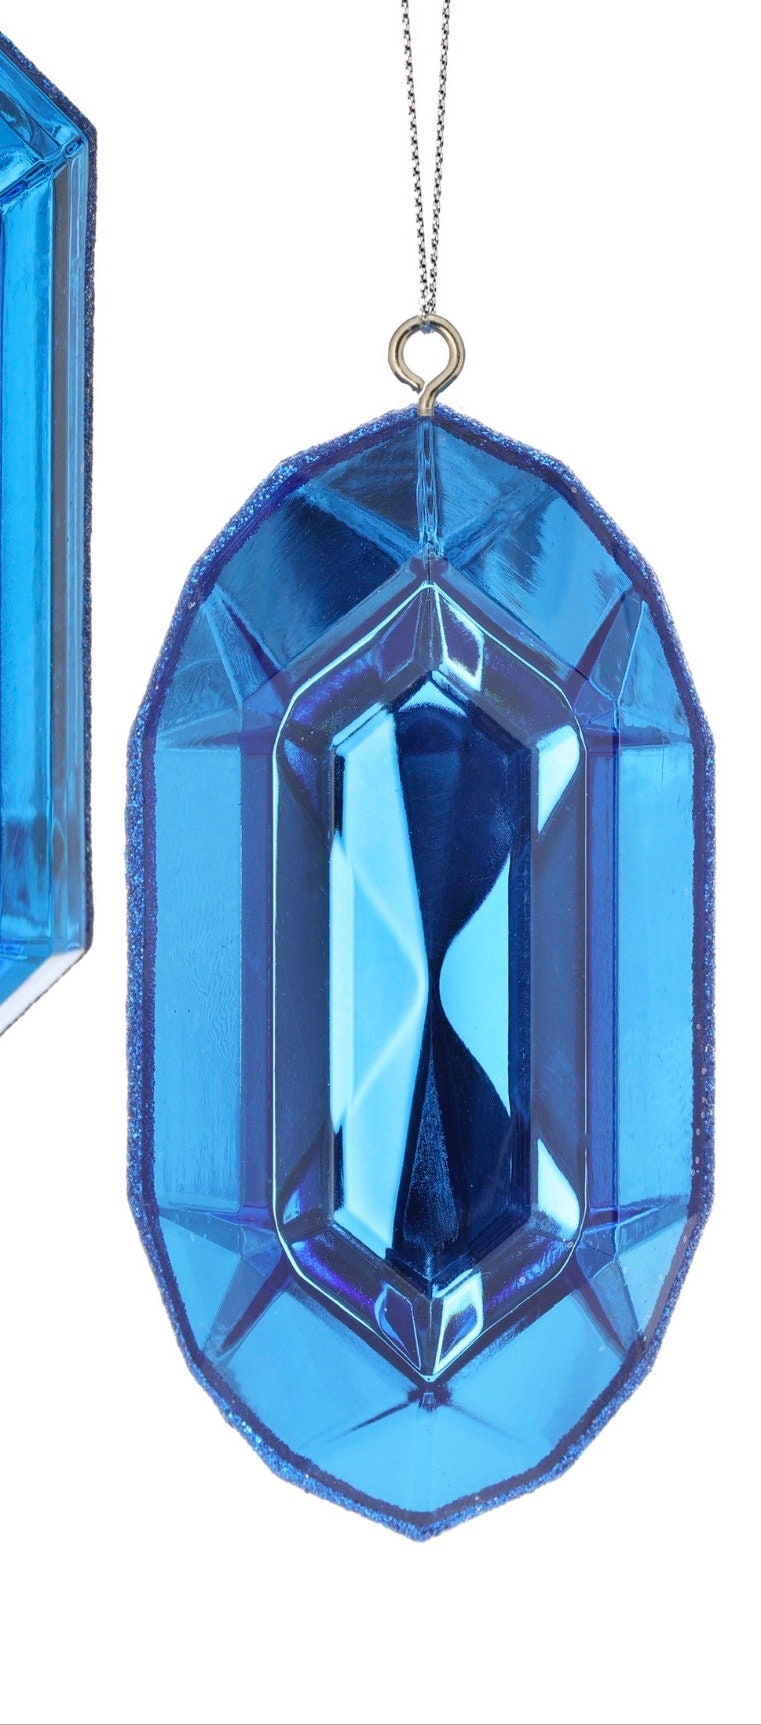 Sapphire Blue Acrylic Gem Ornament -Rectangle or Oval Jewel - 5 inches - SOLD SEPARATELY